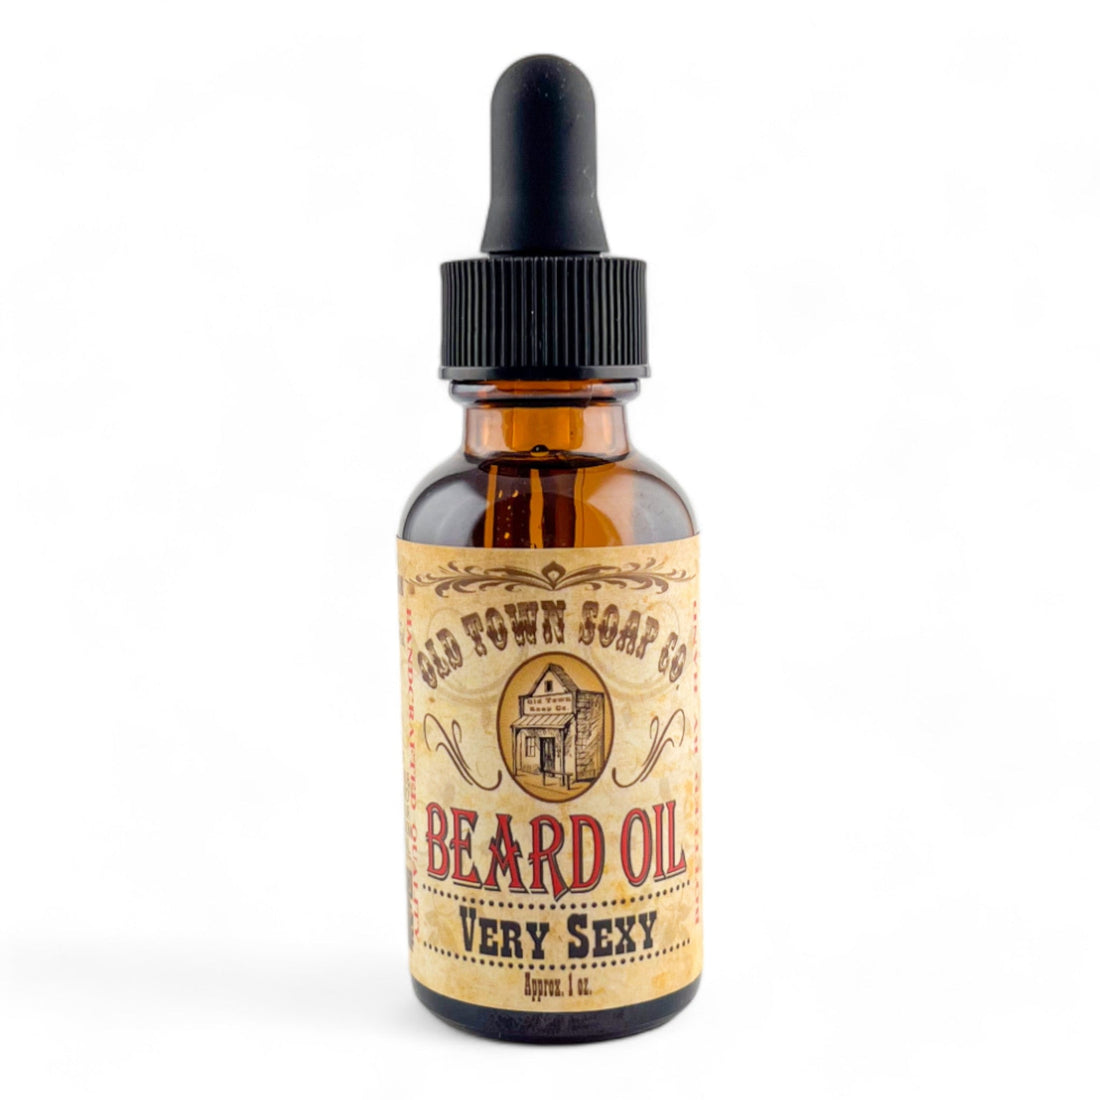 Very Sexy Beard Oil - Old Town Soap Co.